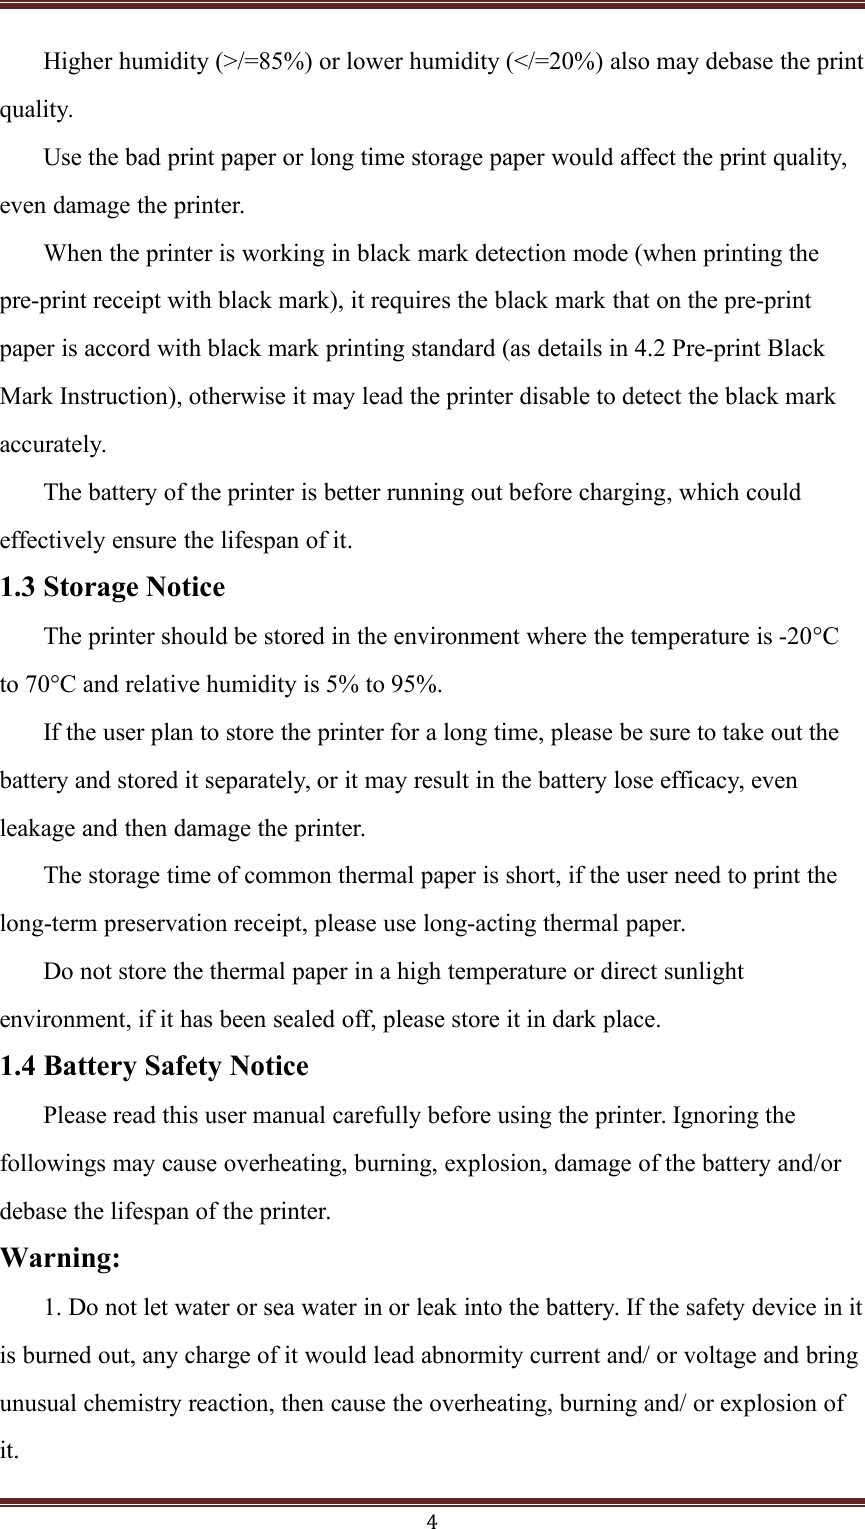 4Higher humidity (&gt;/=85%) or lower humidity (&lt;/=20%) also may debase the printquality.Use the bad print paper or long time storage paper would affect the print quality,even damage the printer.When the printer is working in black mark detection mode (when printing thepre-print receipt with black mark), it requires the black mark that on the pre-printpaper is accord with black mark printing standard (as details in 4.2 Pre-print BlackMark Instruction), otherwise it may lead the printer disable to detect the black markaccurately.The battery of the printer is better running out before charging, which couldeffectively ensure the lifespan of it.1.3 Storage NoticeThe printer should be stored in the environment where the temperature is -20°Cto 70°C and relative humidity is 5% to 95%.If the user plan to store the printer for a long time, please be sure to take out thebattery and stored it separately, or it may result in the battery lose efficacy, evenleakage and then damage the printer.The storage time of common thermal paper is short, if the user need to print thelong-term preservation receipt, please use long-acting thermal paper.Do not store the thermal paper in a high temperature or direct sunlightenvironment, if it has been sealed off, please store it in dark place.1.4 Battery Safety NoticePlease read this user manual carefully before using the printer. Ignoring thefollowings may cause overheating, burning, explosion, damage of the battery and/ordebase the lifespan of the printer.Warning:1. Do not let water or sea water in or leak into the battery. If the safety device in itis burned out, any charge of it would lead abnormity current and/ or voltage and bringunusual chemistry reaction, then cause the overheating, burning and/ or explosion ofit.